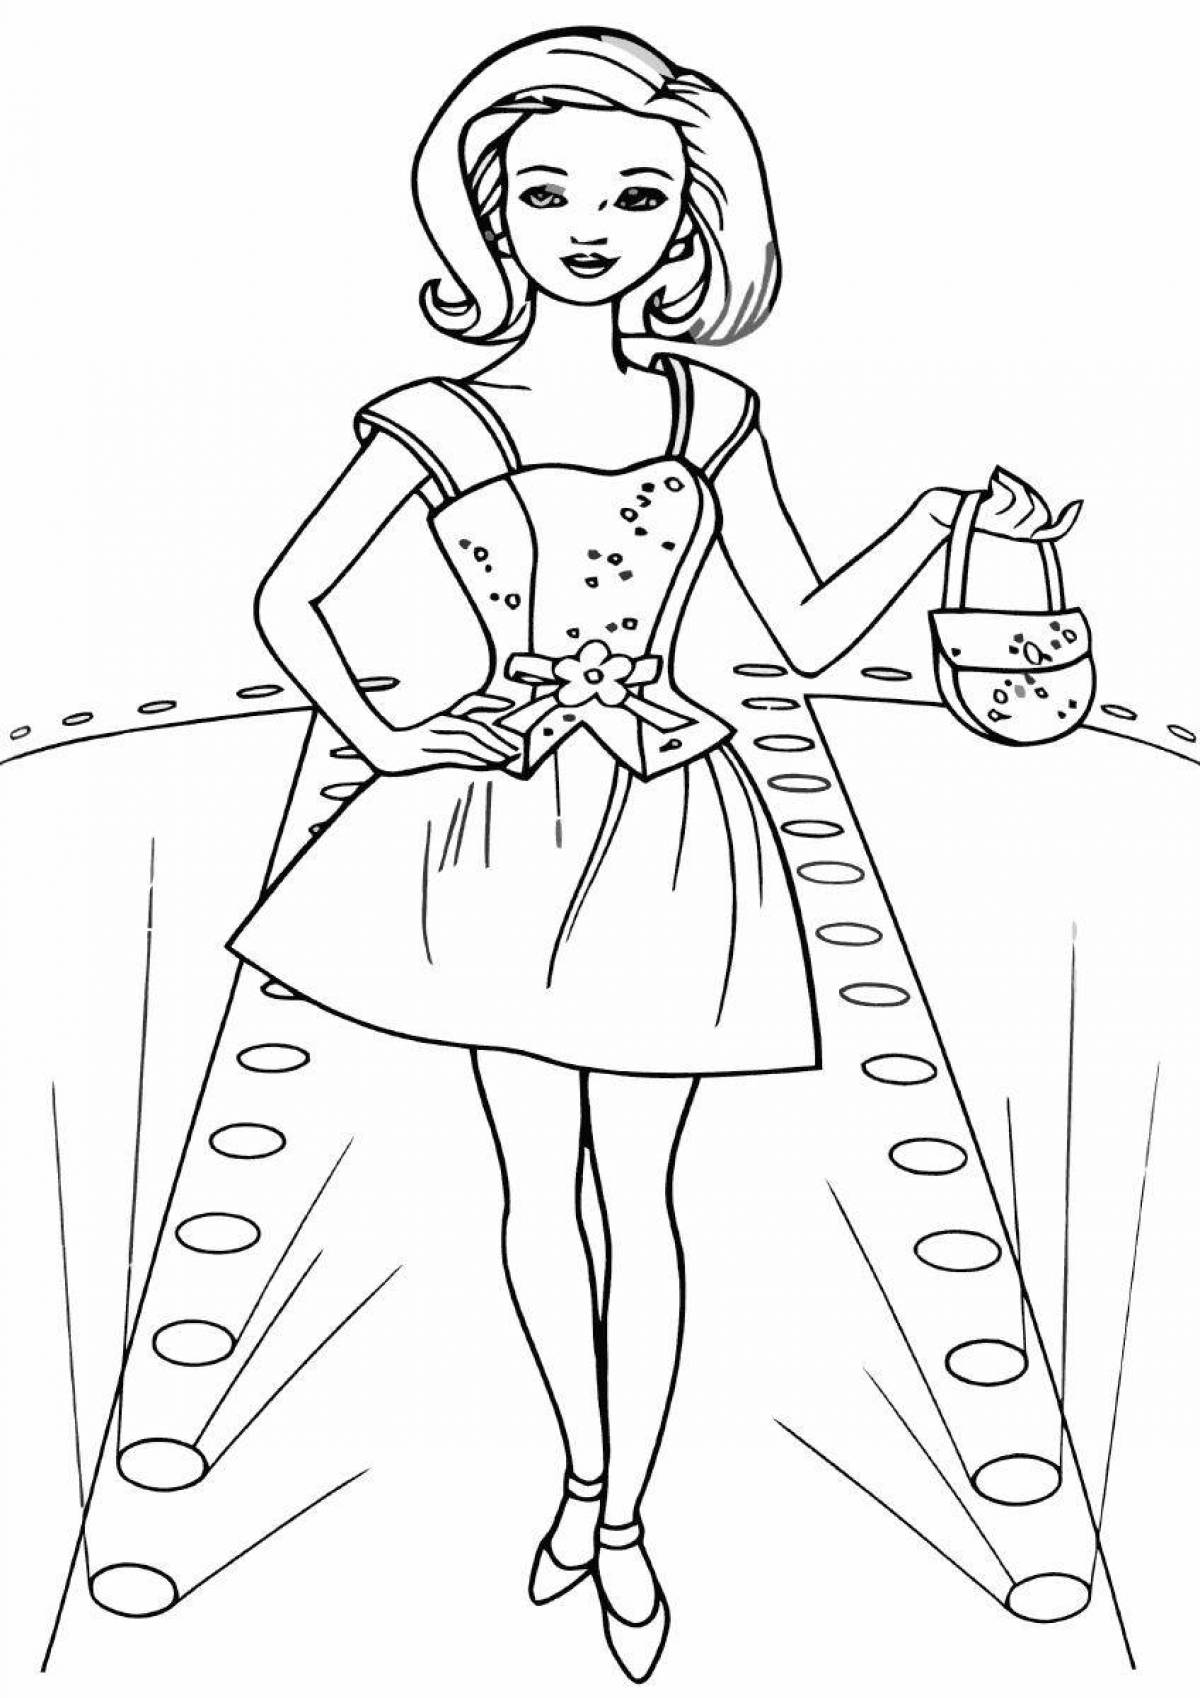 Fashion model coloring page